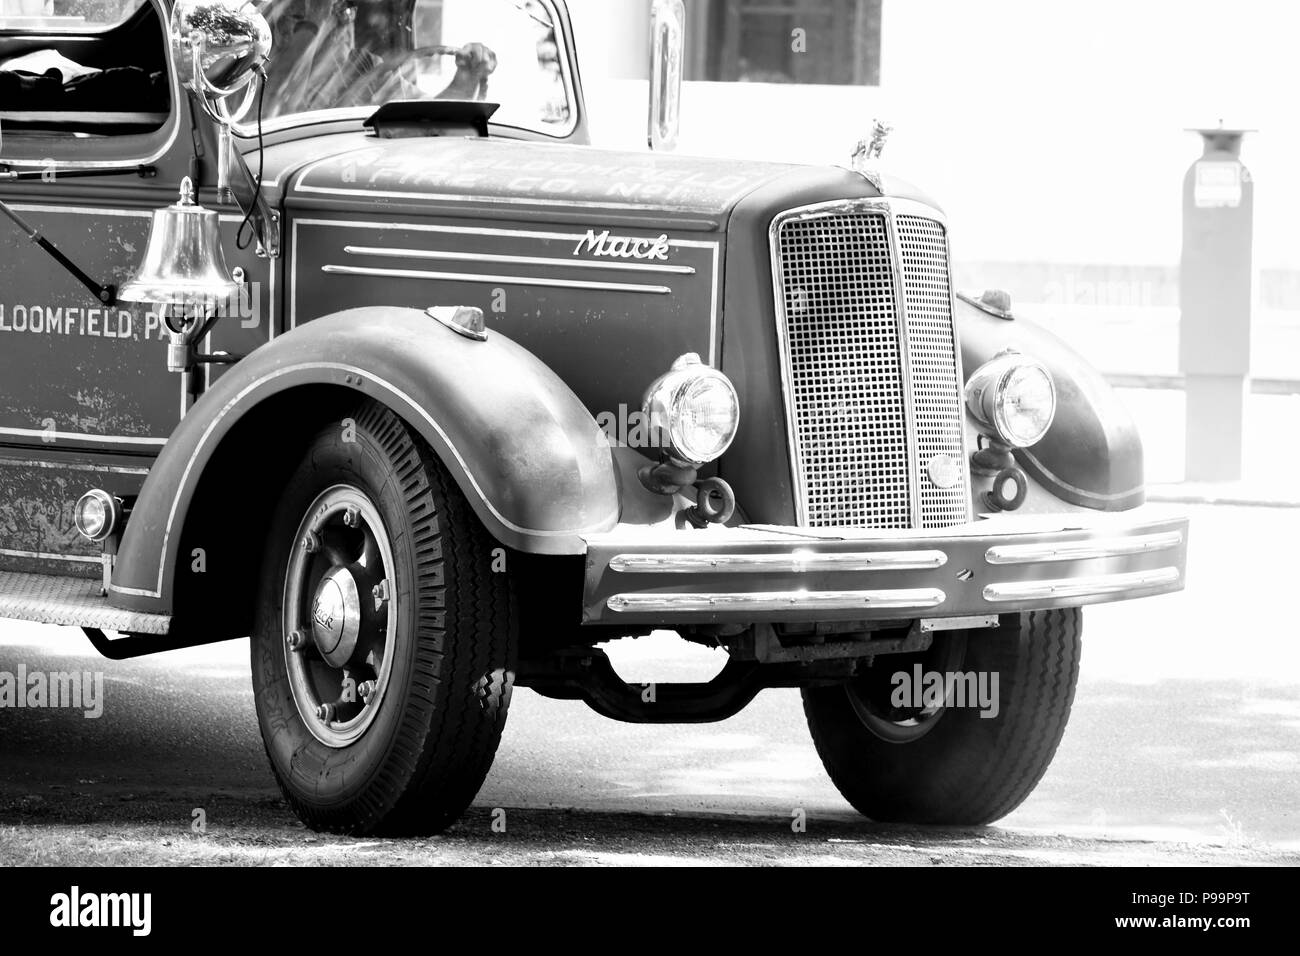 Old Fashioned Fire Truck Stock Photo